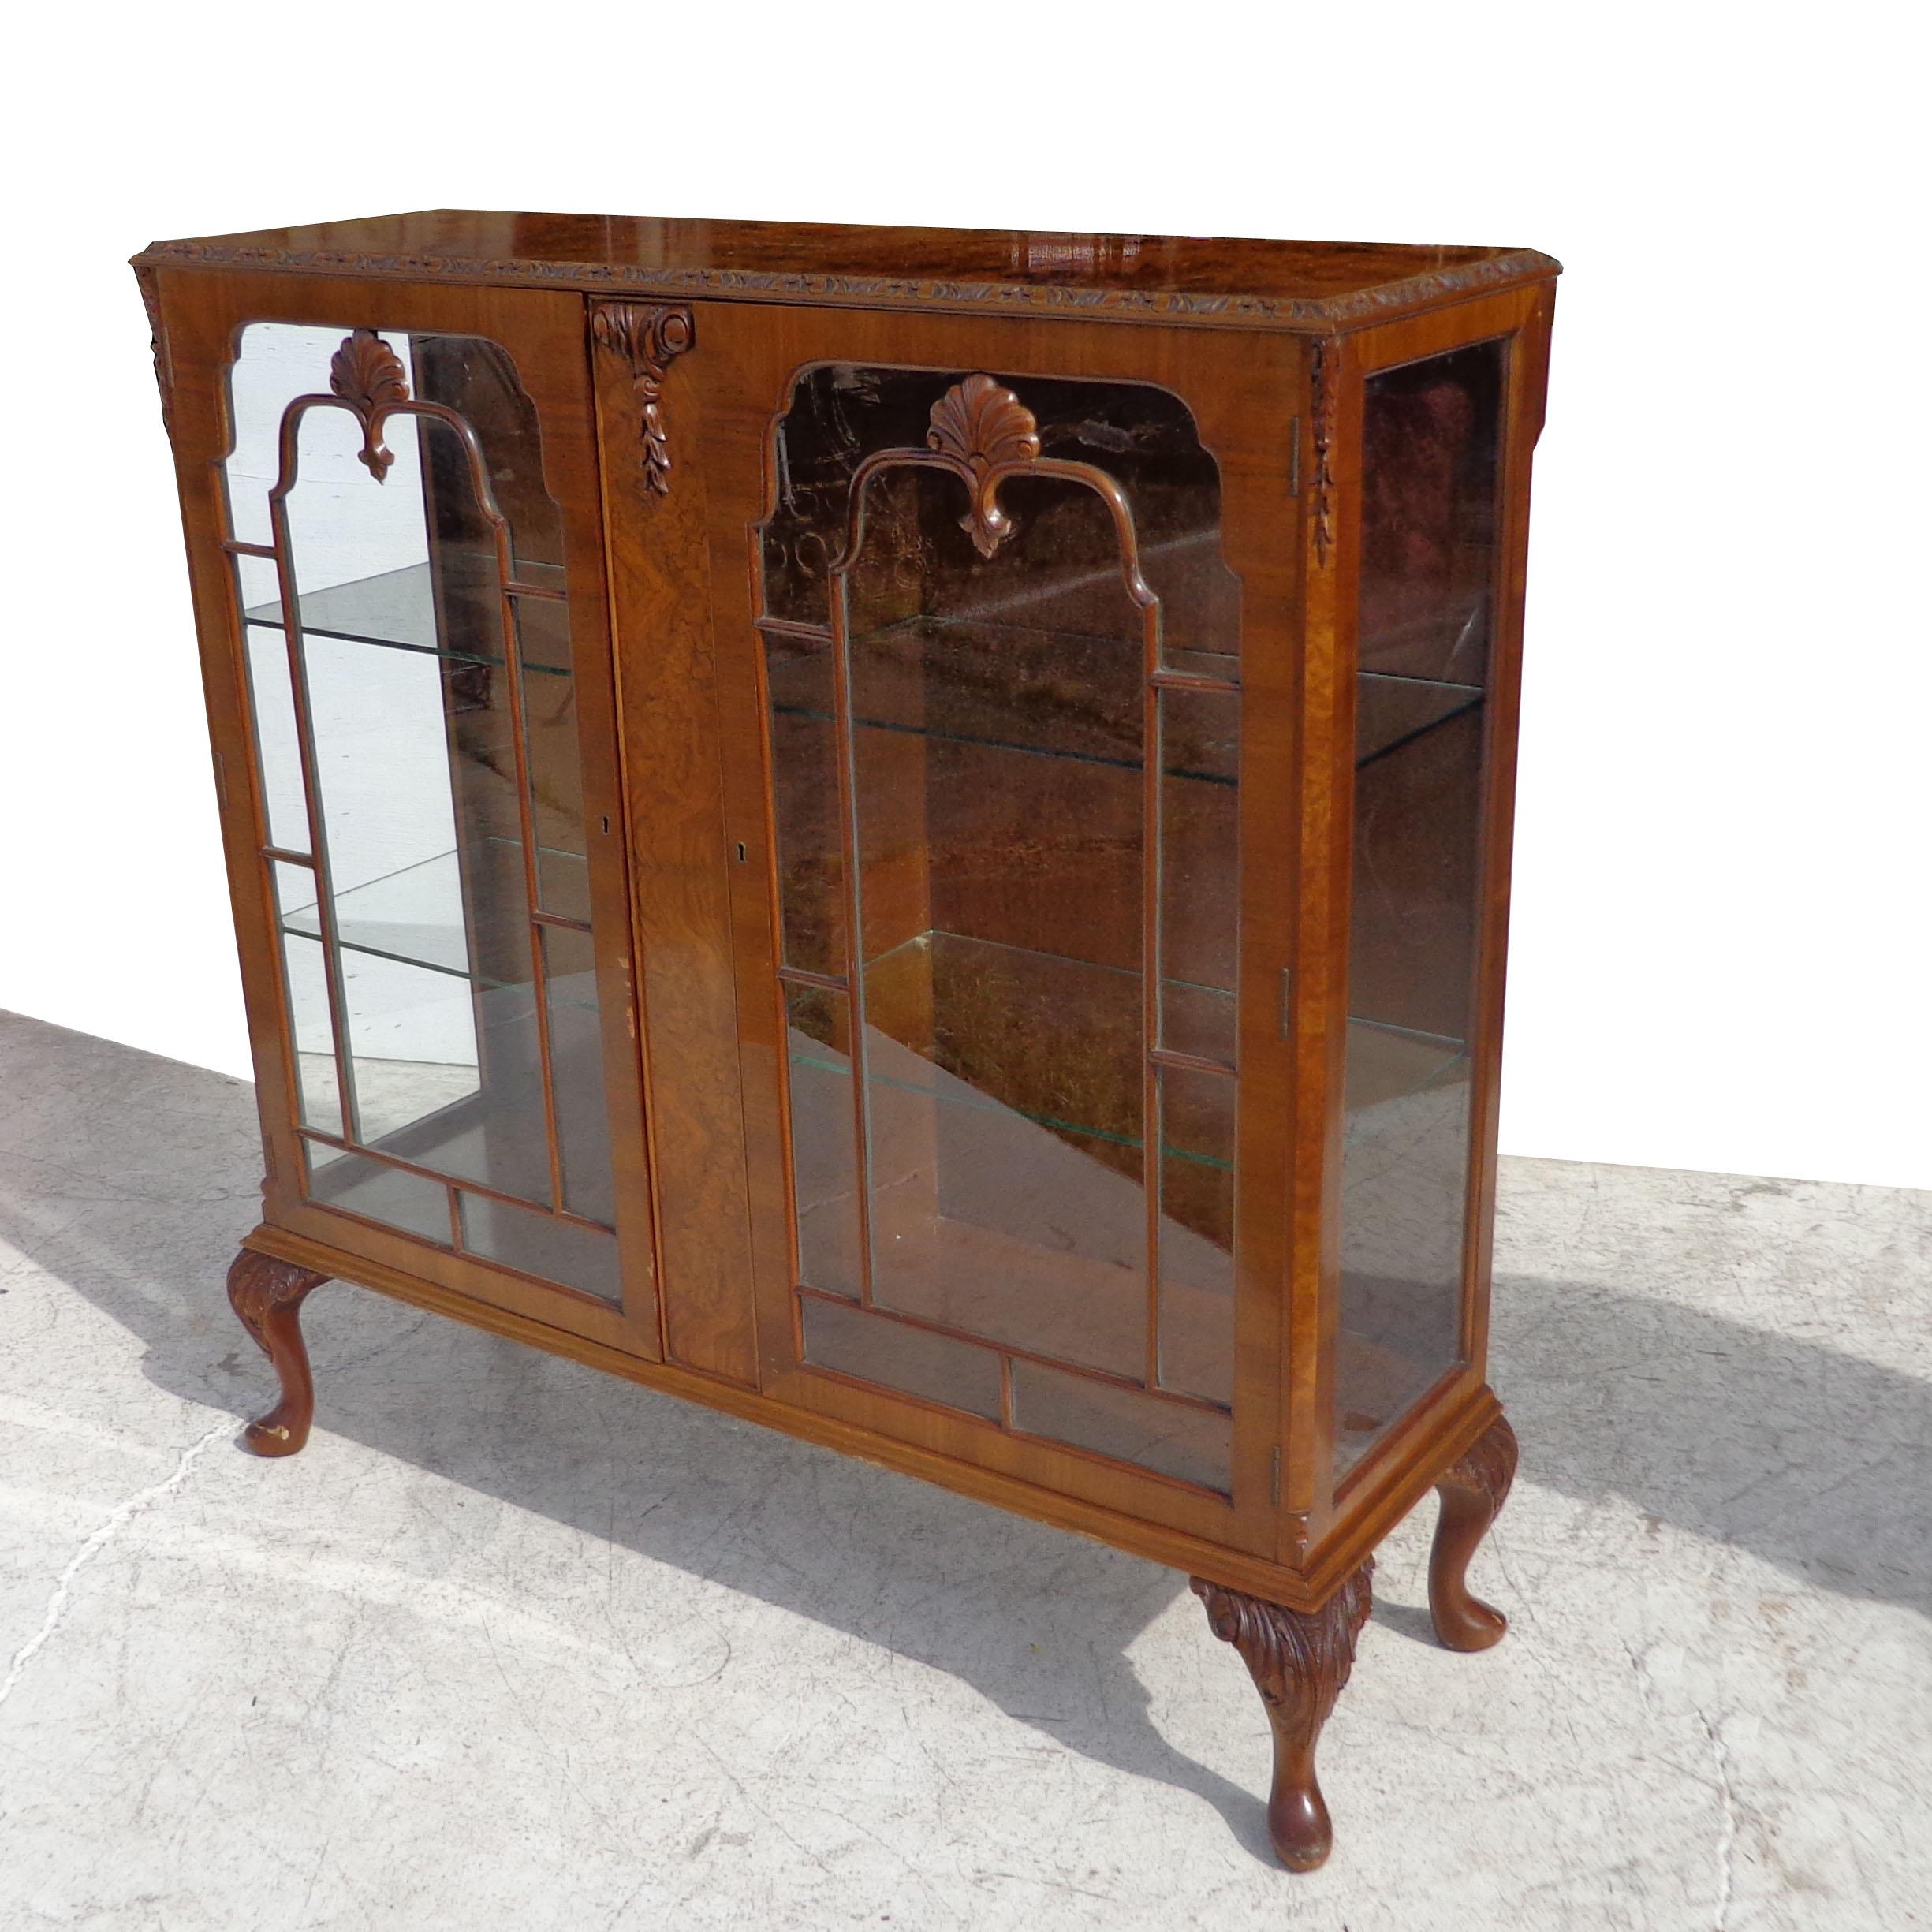 Art Deco Display Curio cabinet
Pratts of Bradford

Beautiful burled walnut with double doors opening to 2 glass shelves. Carved cabriole legs with decorative appliques on doors. Measure: 45.5